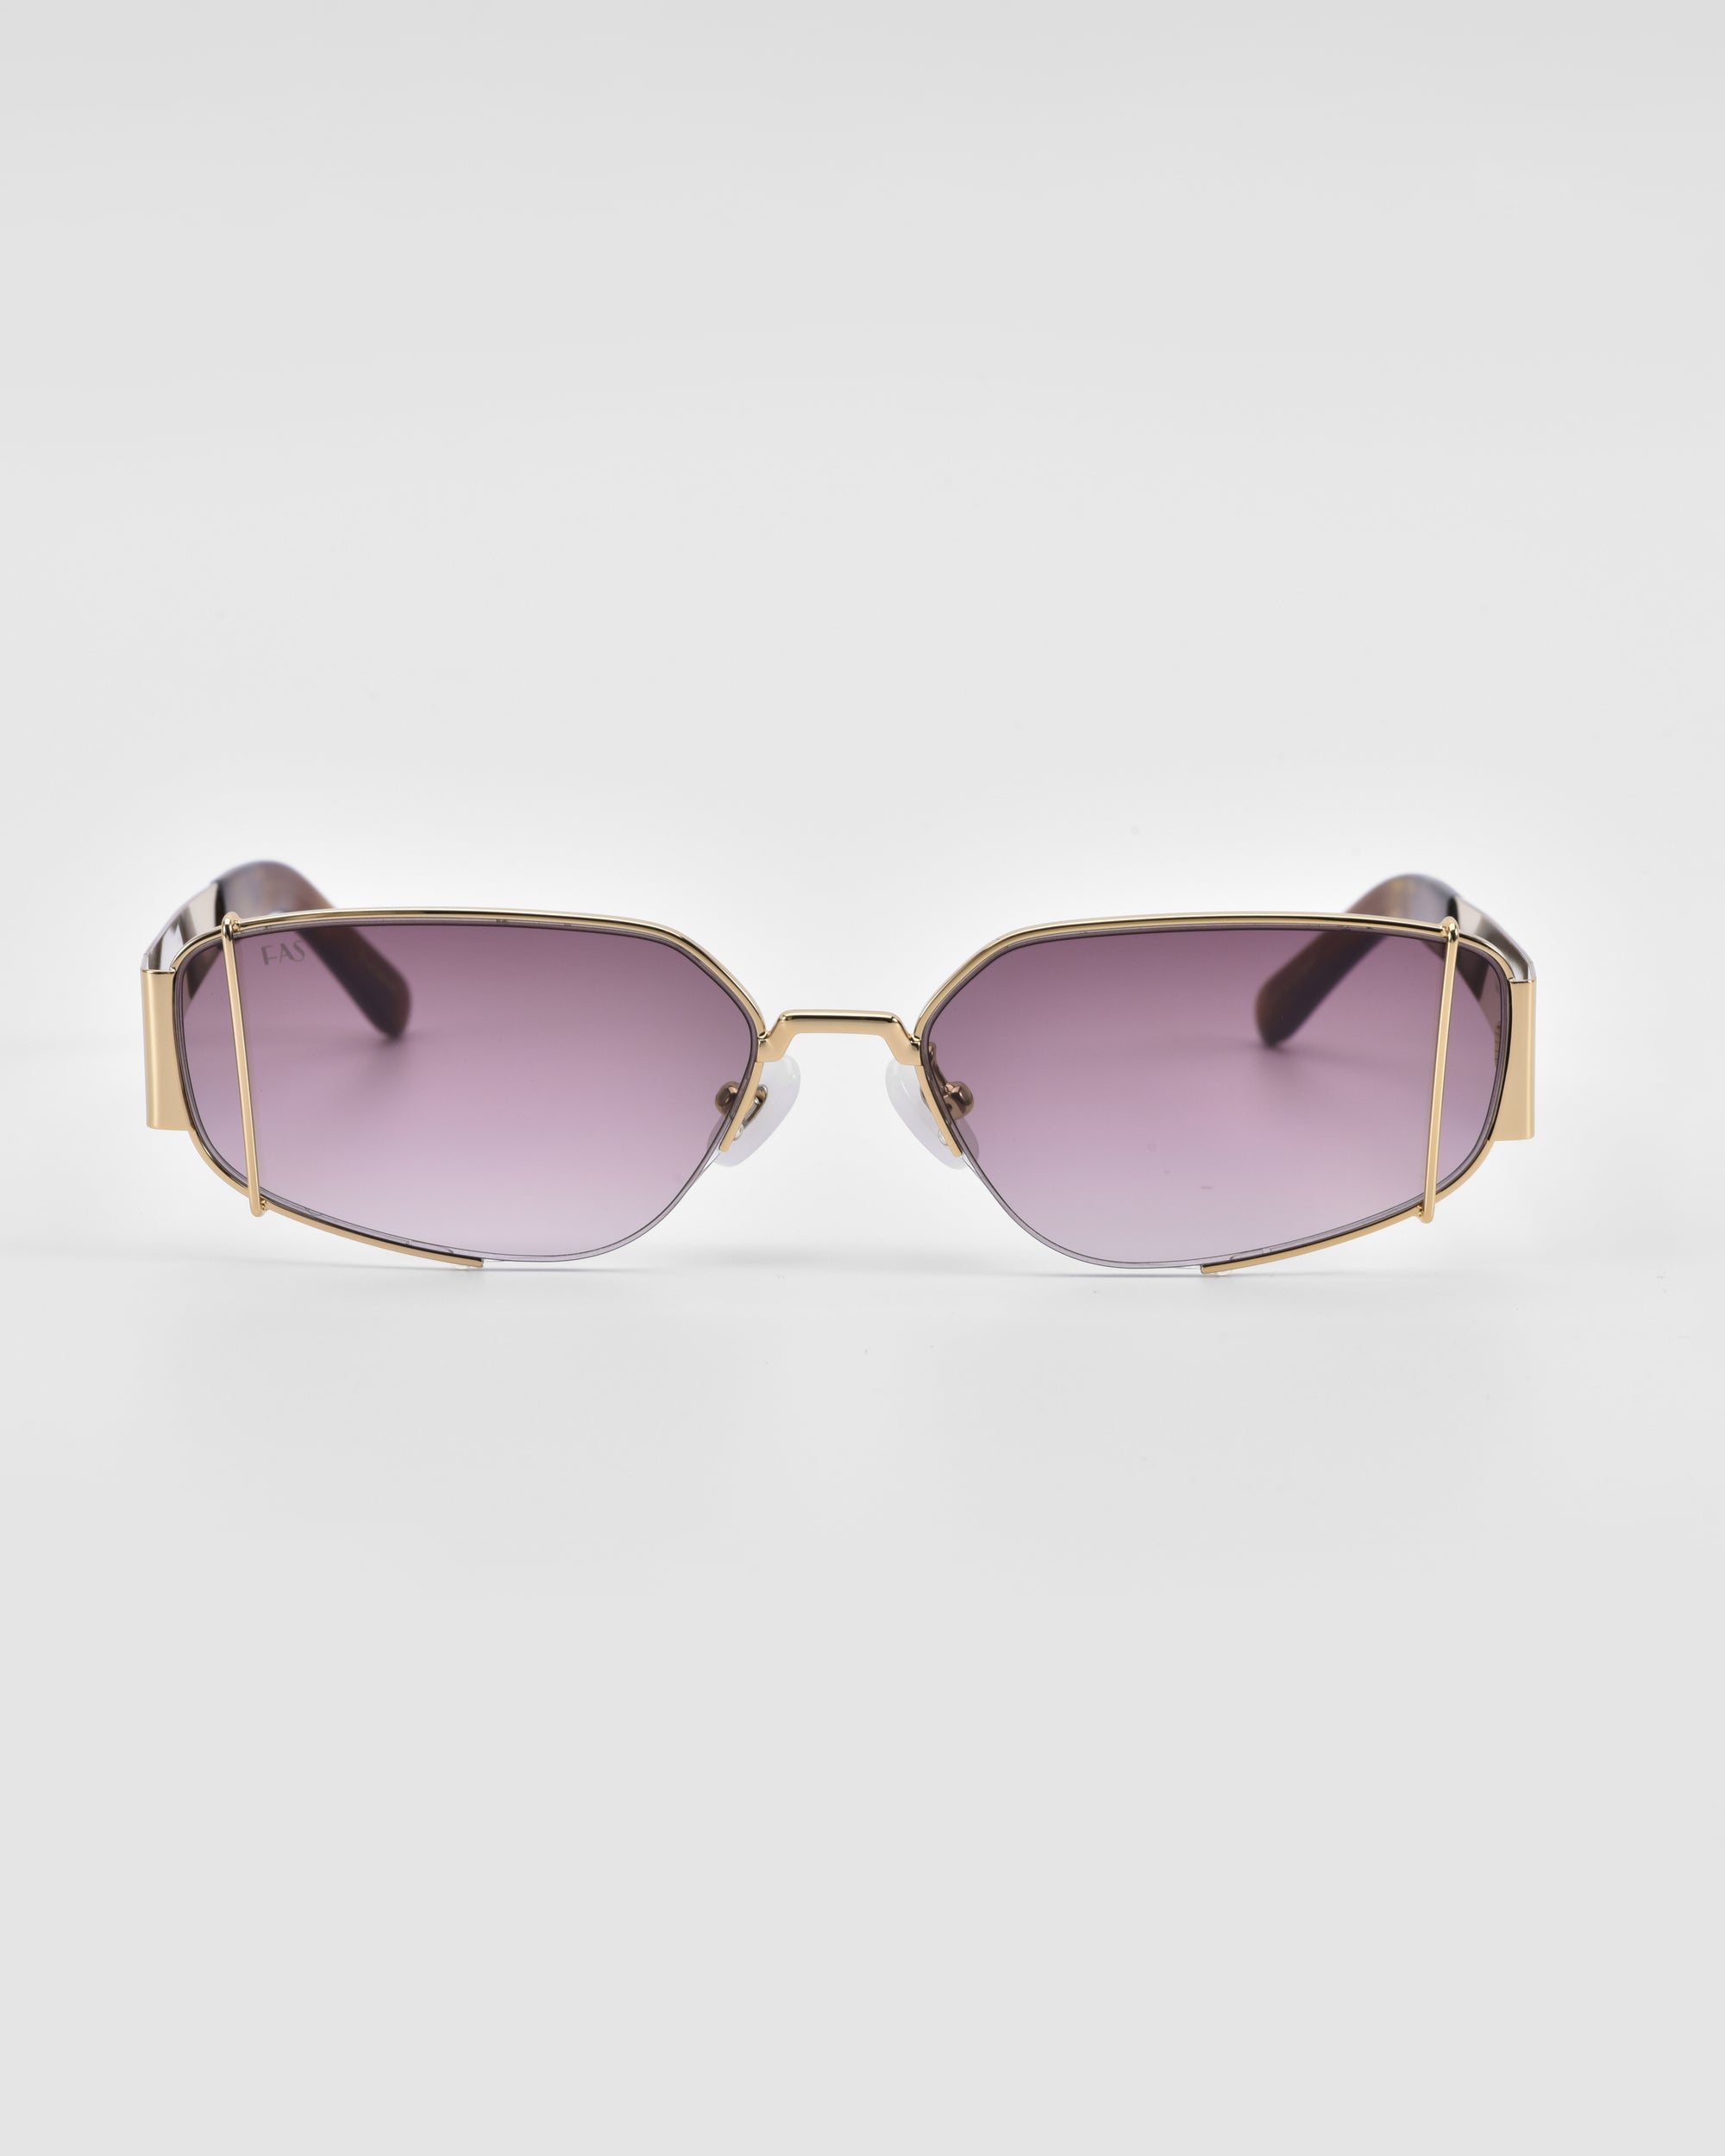 A pair of For Art's Sake® Talia sunglasses with purple-tinted lenses and a unique geometric metal frame. The frame, finished in 18-karat gold, features an angular design, giving the sunglasses a modern and edgy look. The background is plain white.